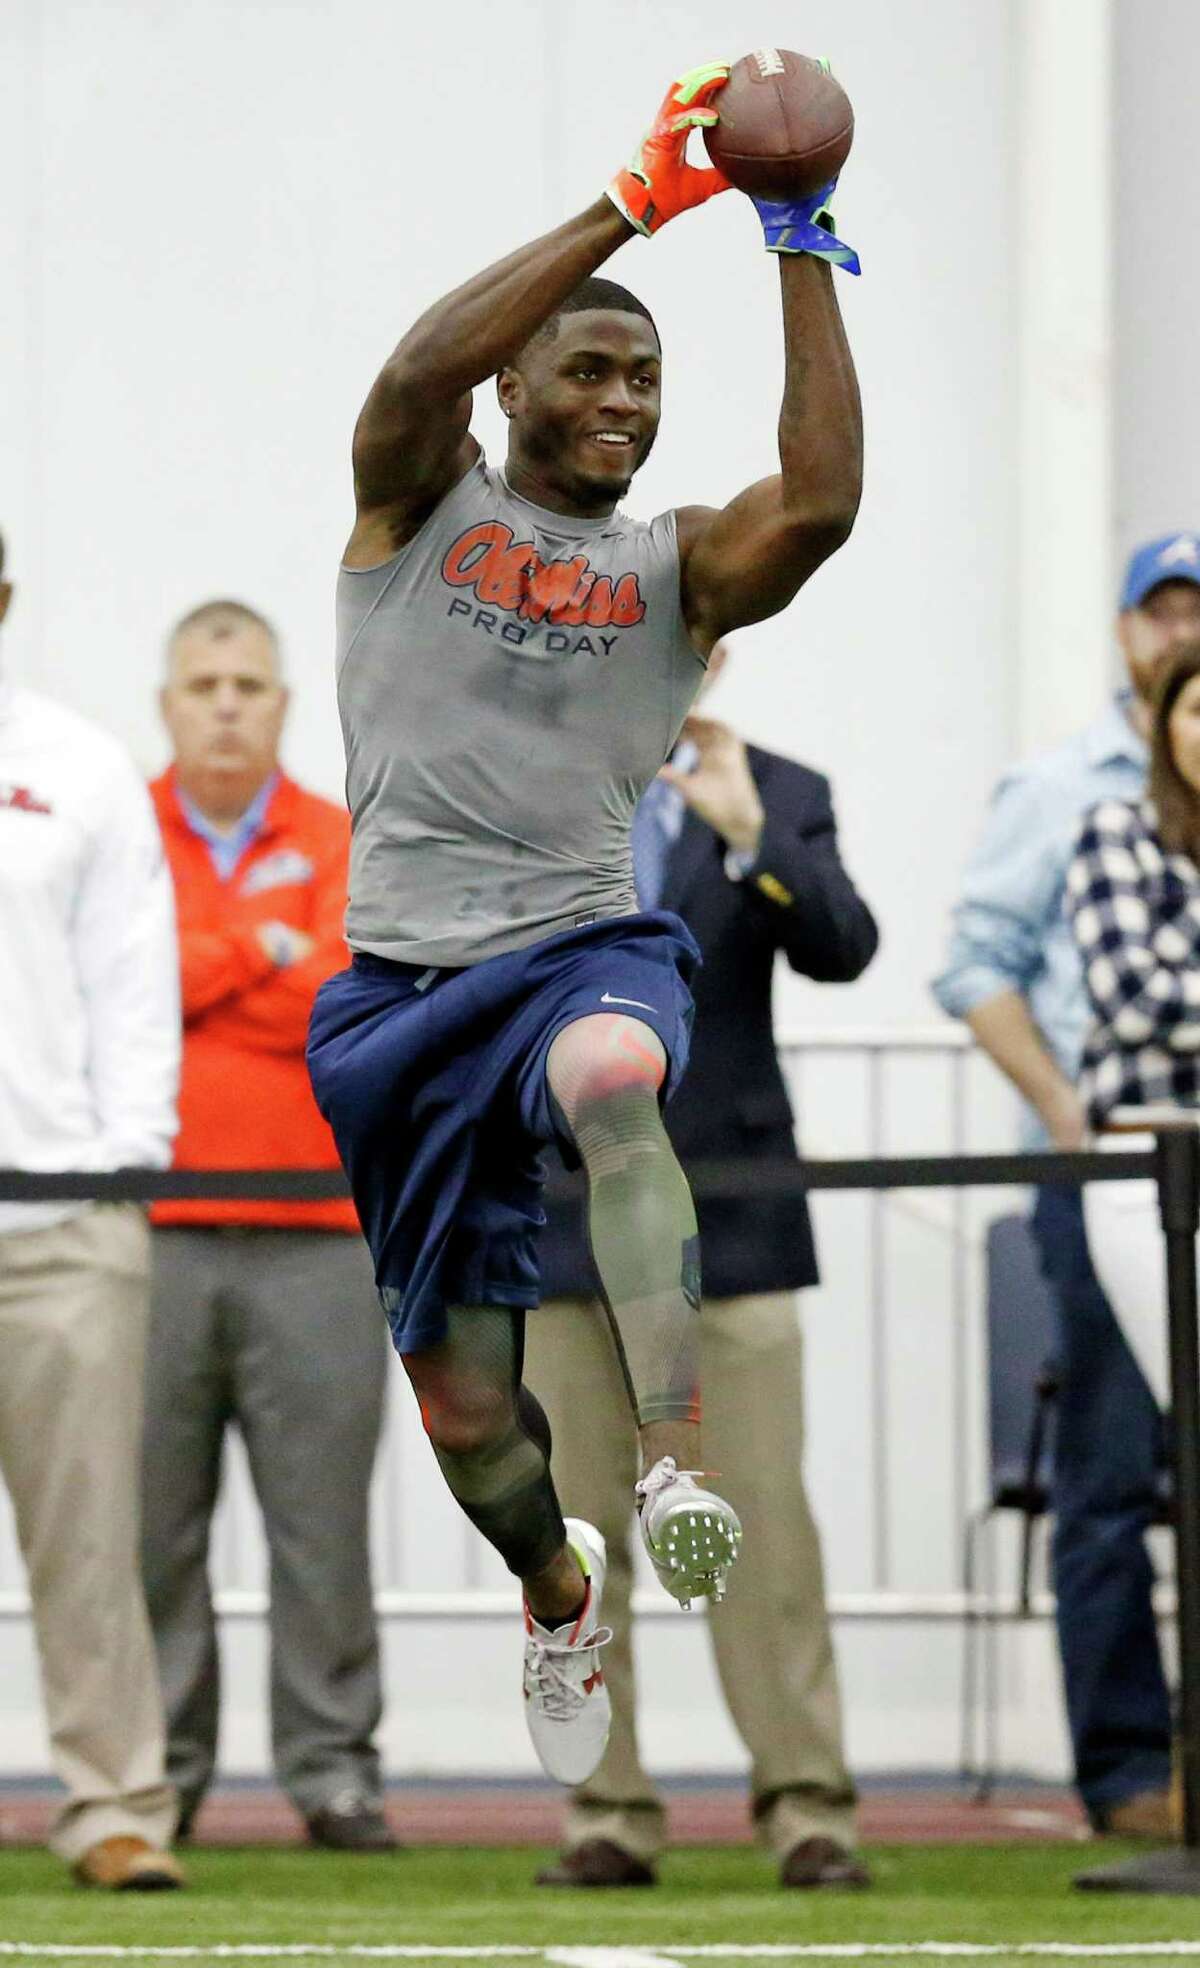 Wide receiver Laquon Treadwell reaches for a pass during drills at Mississippi's NFL football Pro Day, Monday, March 28, 2016, in Oxford, Miss. The event is to showcase players for the upcoming NFL football draft. (AP Photo/Rogelio V. Solis)